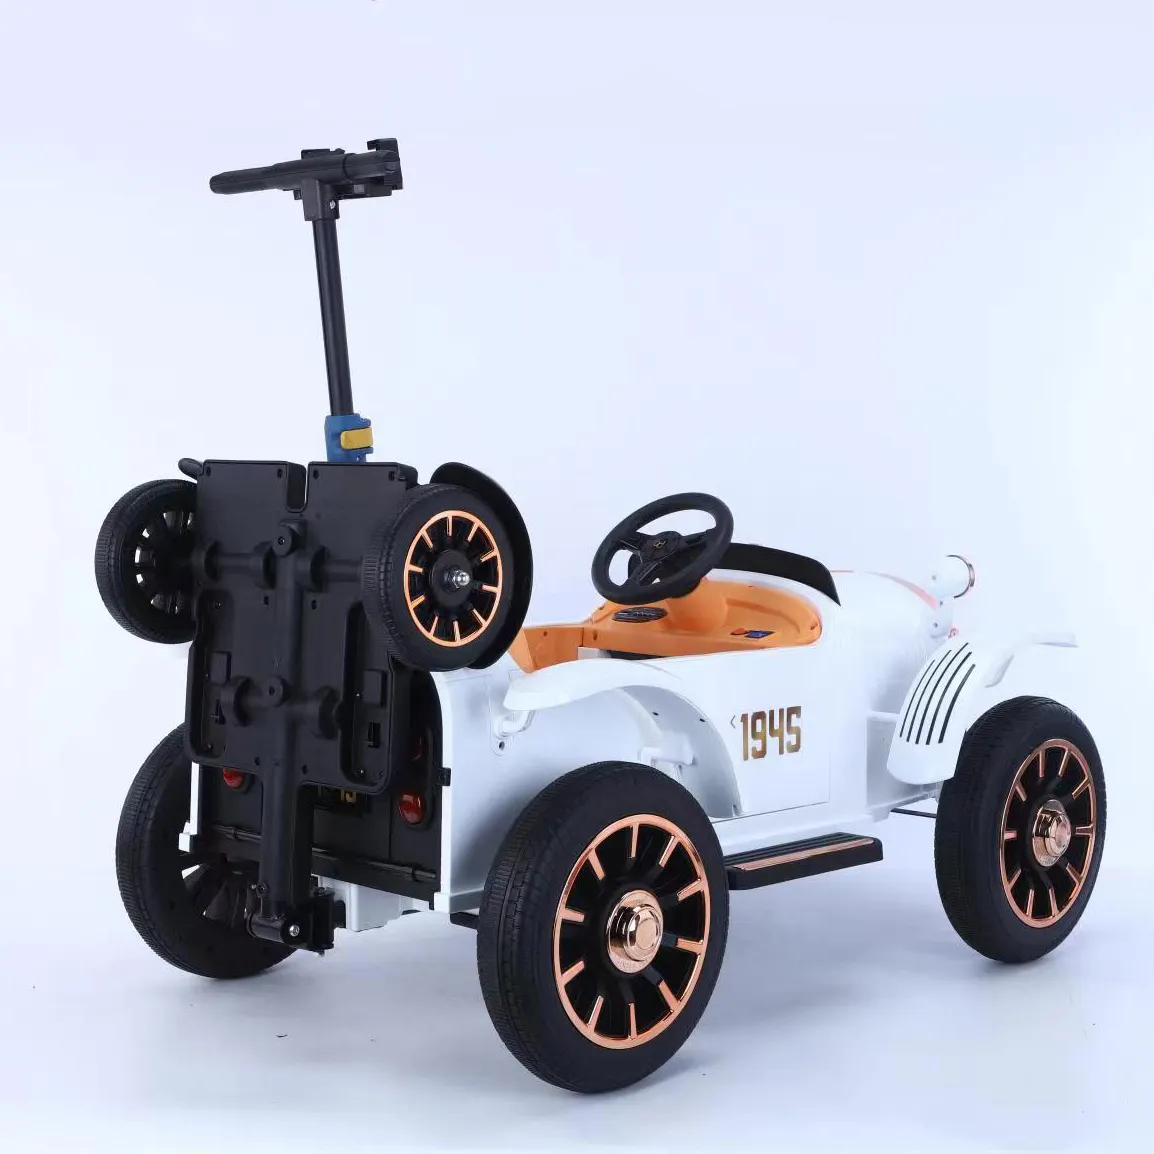 Car Four Wheel Toy Perfect Body Design Easy To Control Children'S Electric Cars